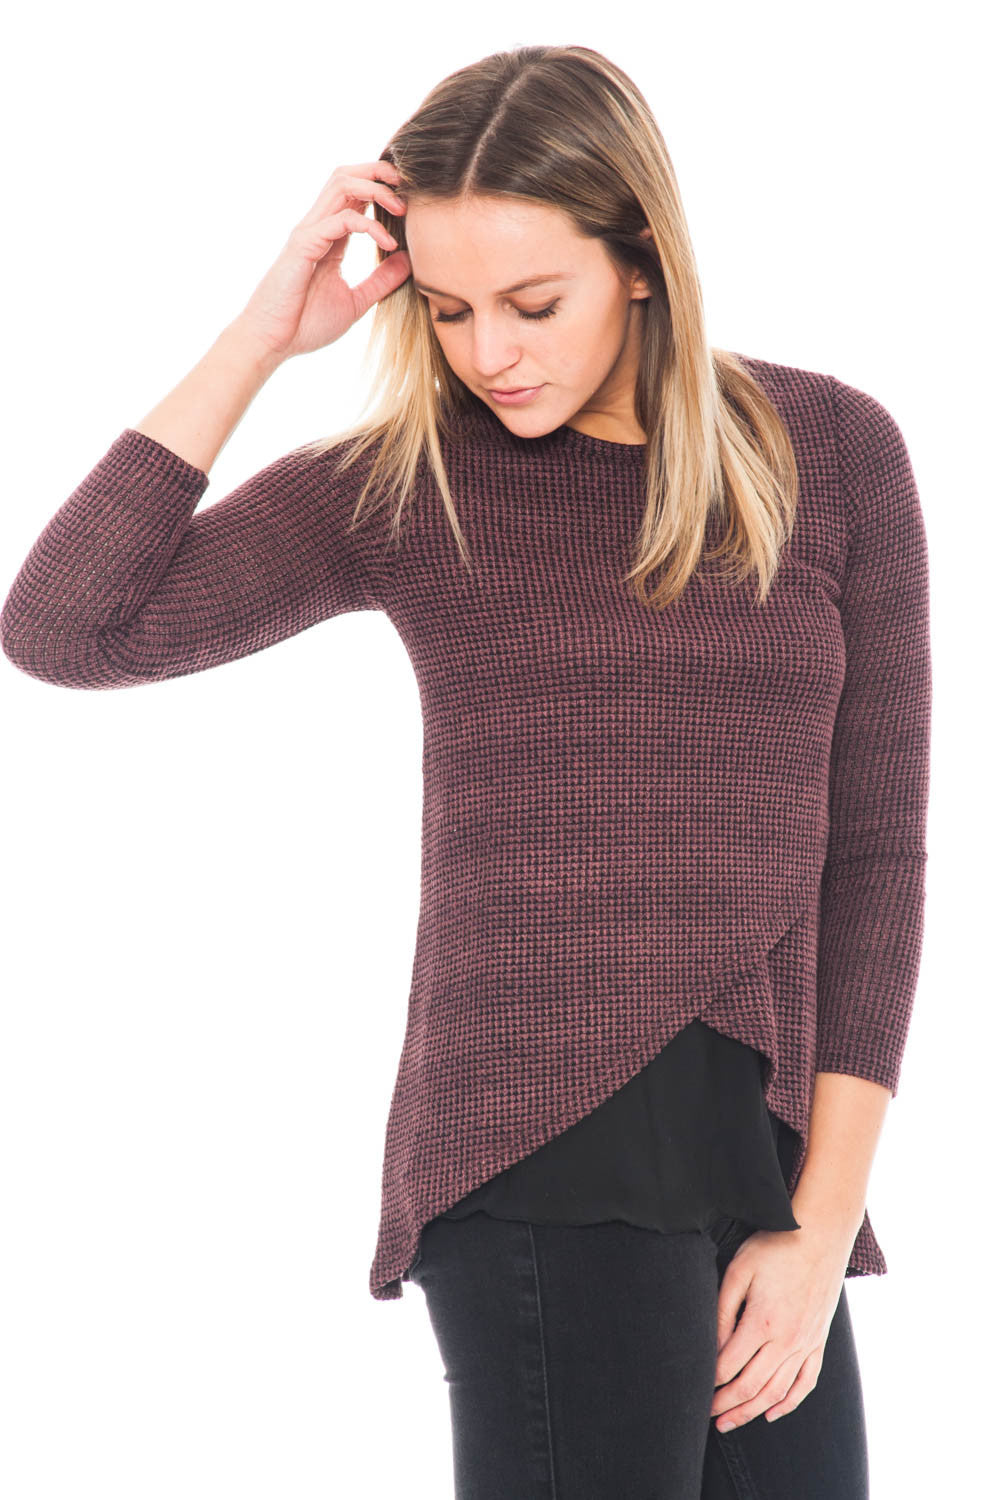 Shirt - 3/4 Sleeve Waffle Knit with an Overlap Front